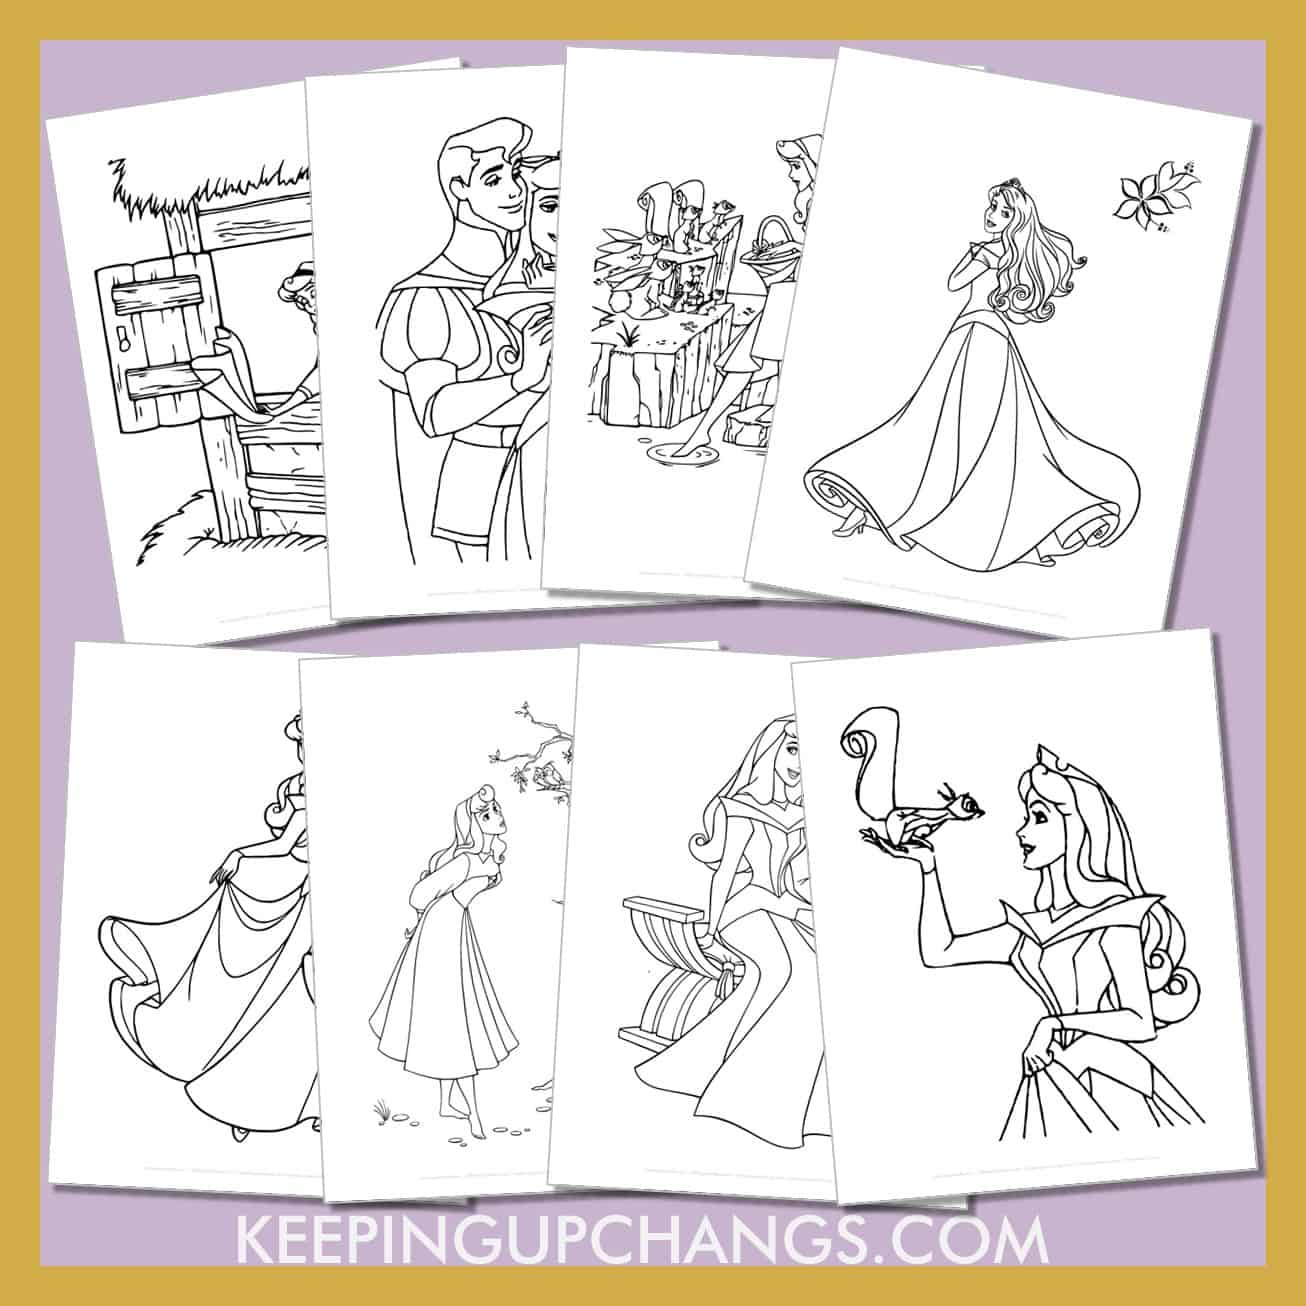 free sleeping beauty pictures to color for toddlers, kids, adults.